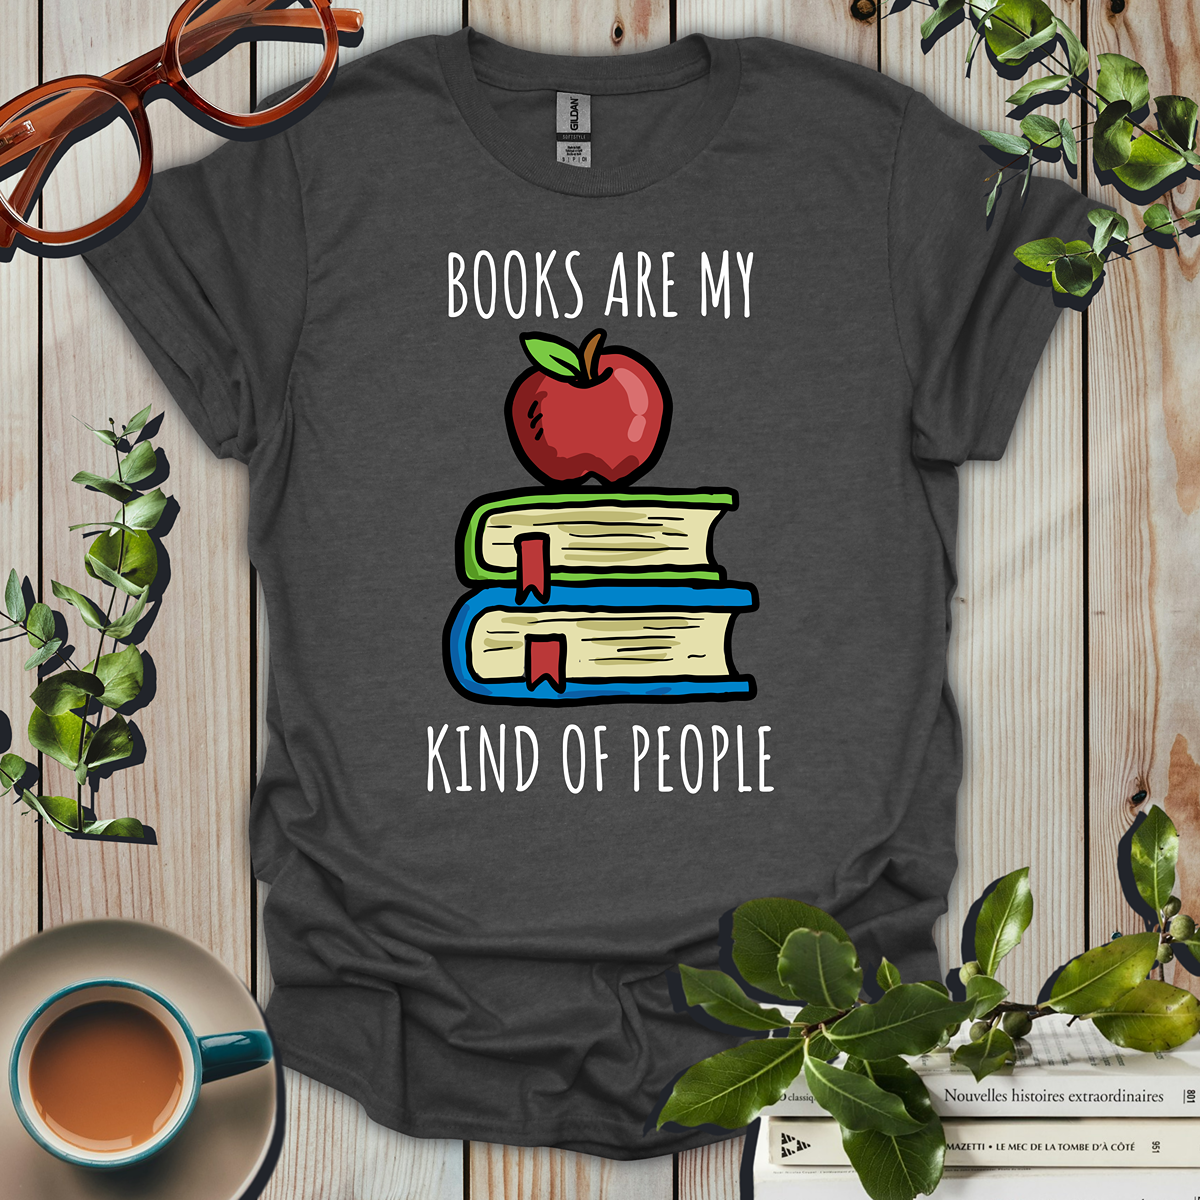 Books Are My Kind Of People T-Shirt